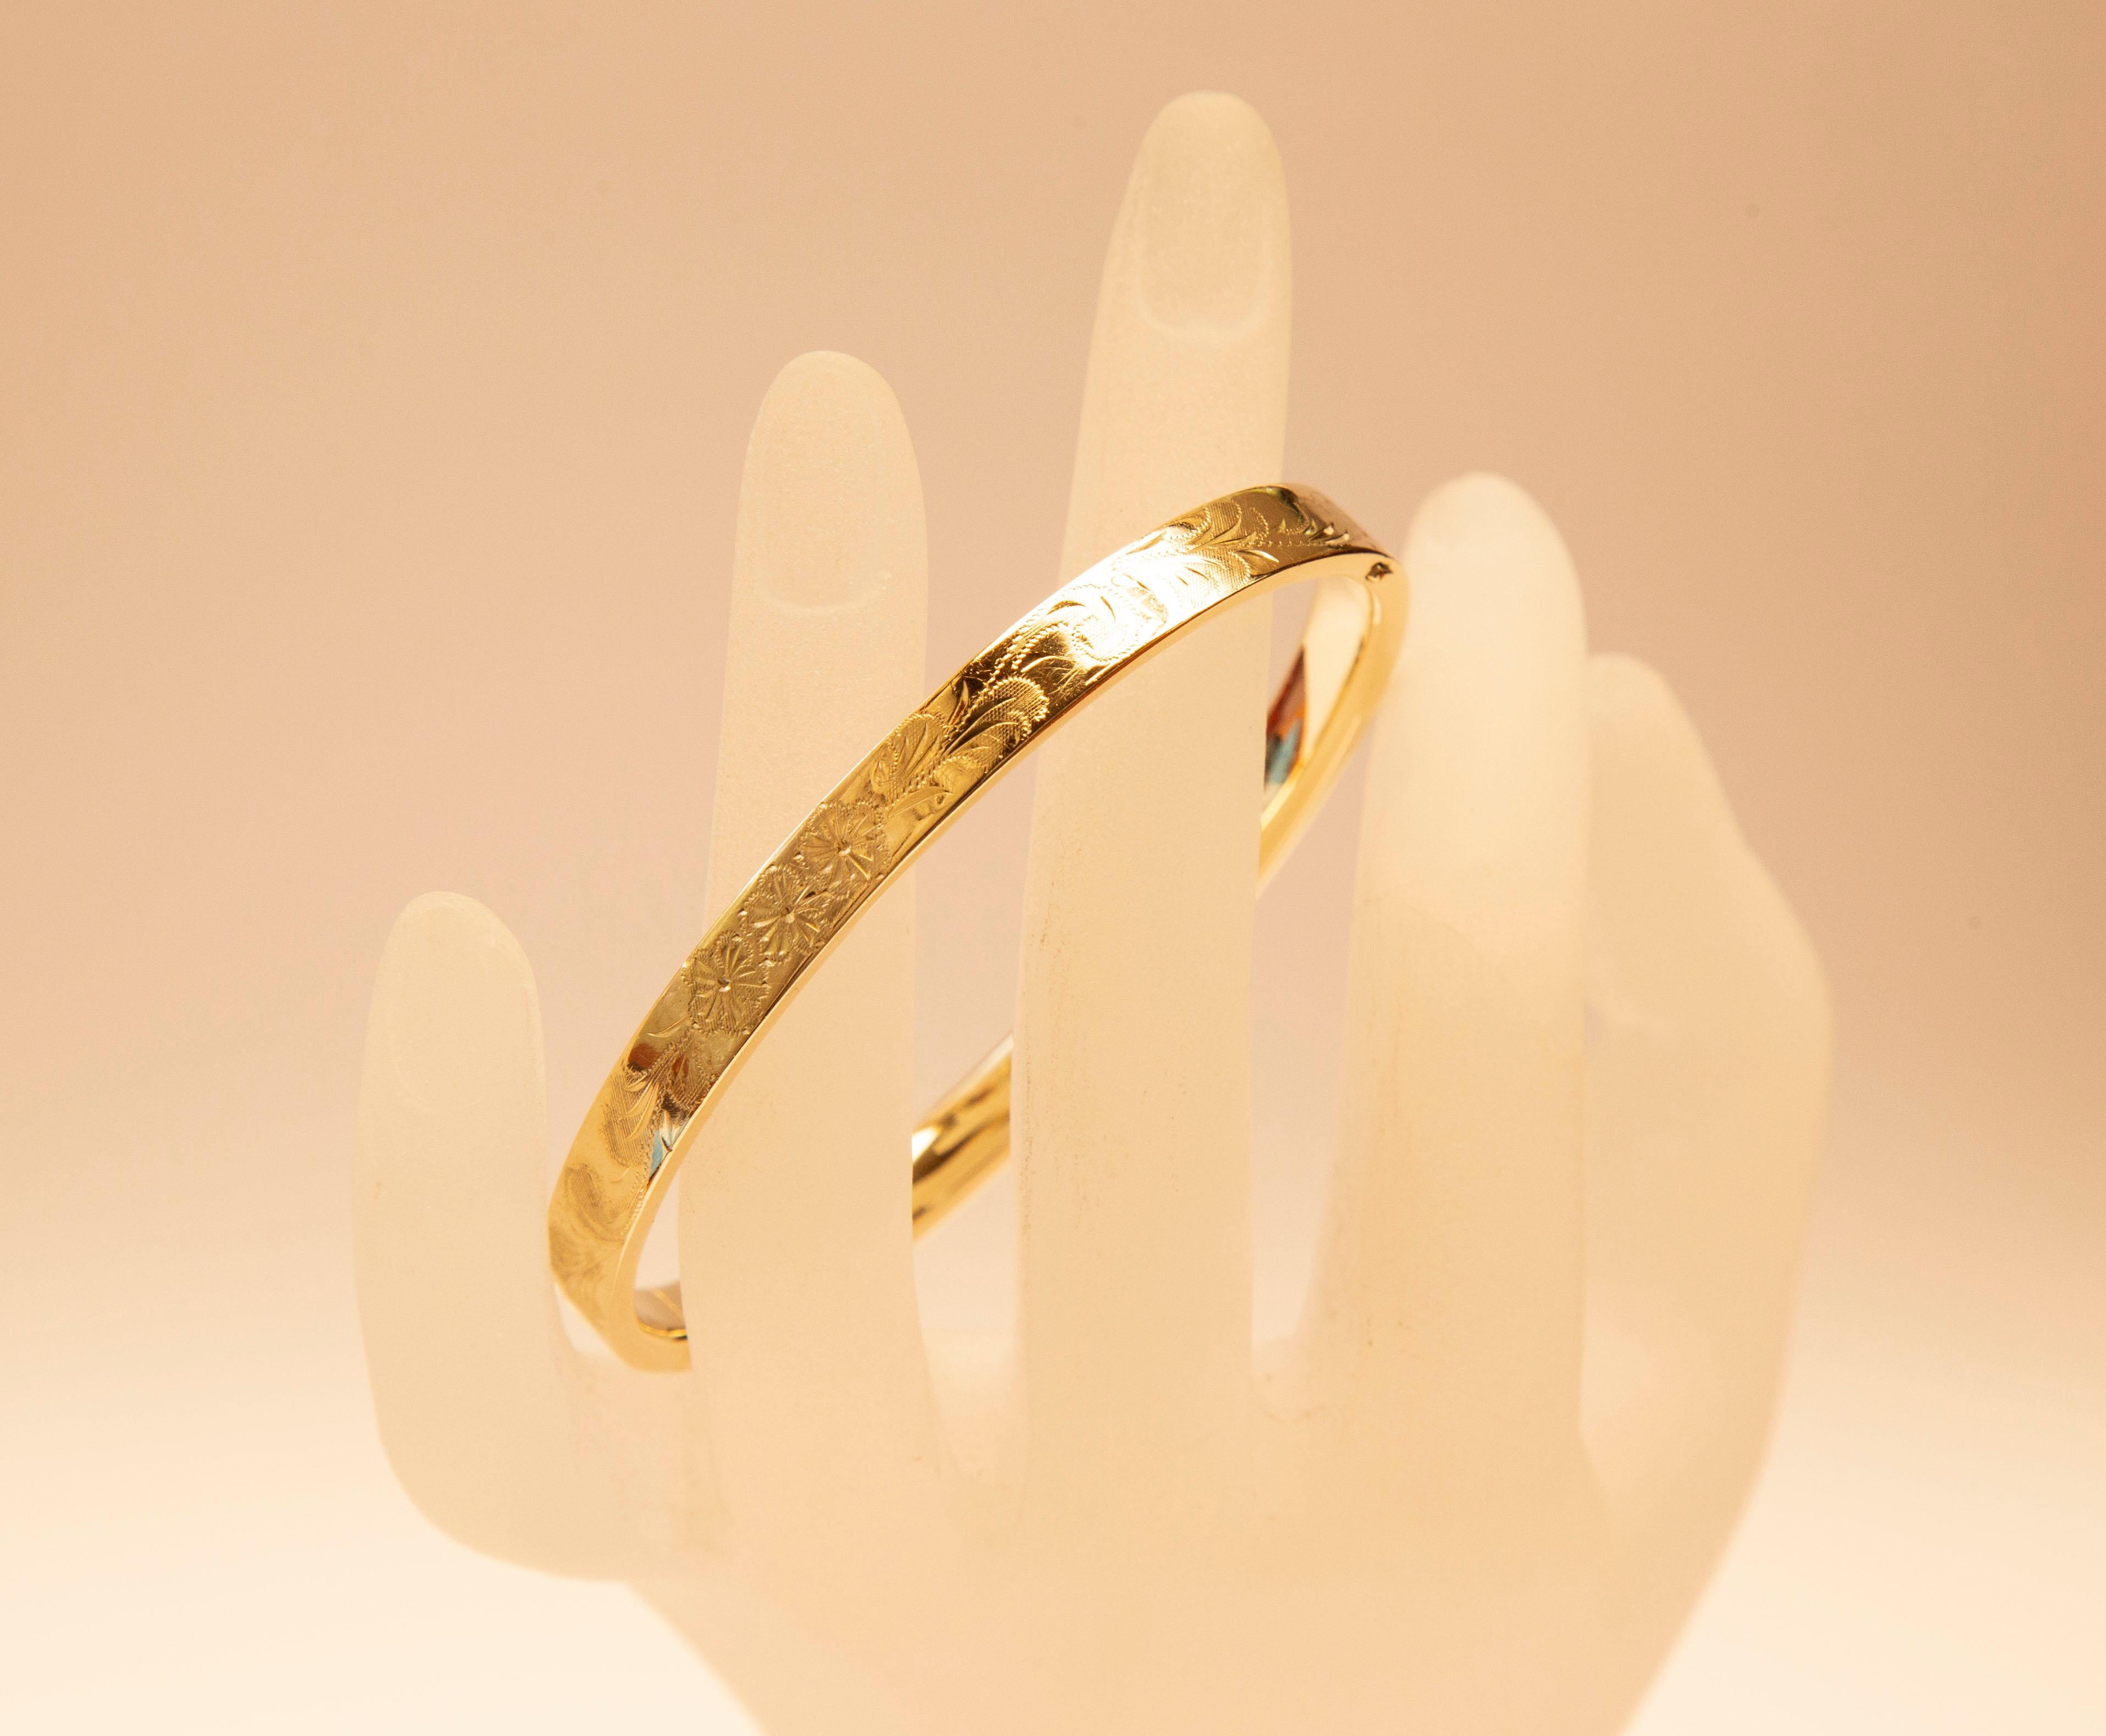 Retro 14 Karat Yellow Solid Gold Bangle Bracelet with Engraved Floral Decoration For Sale